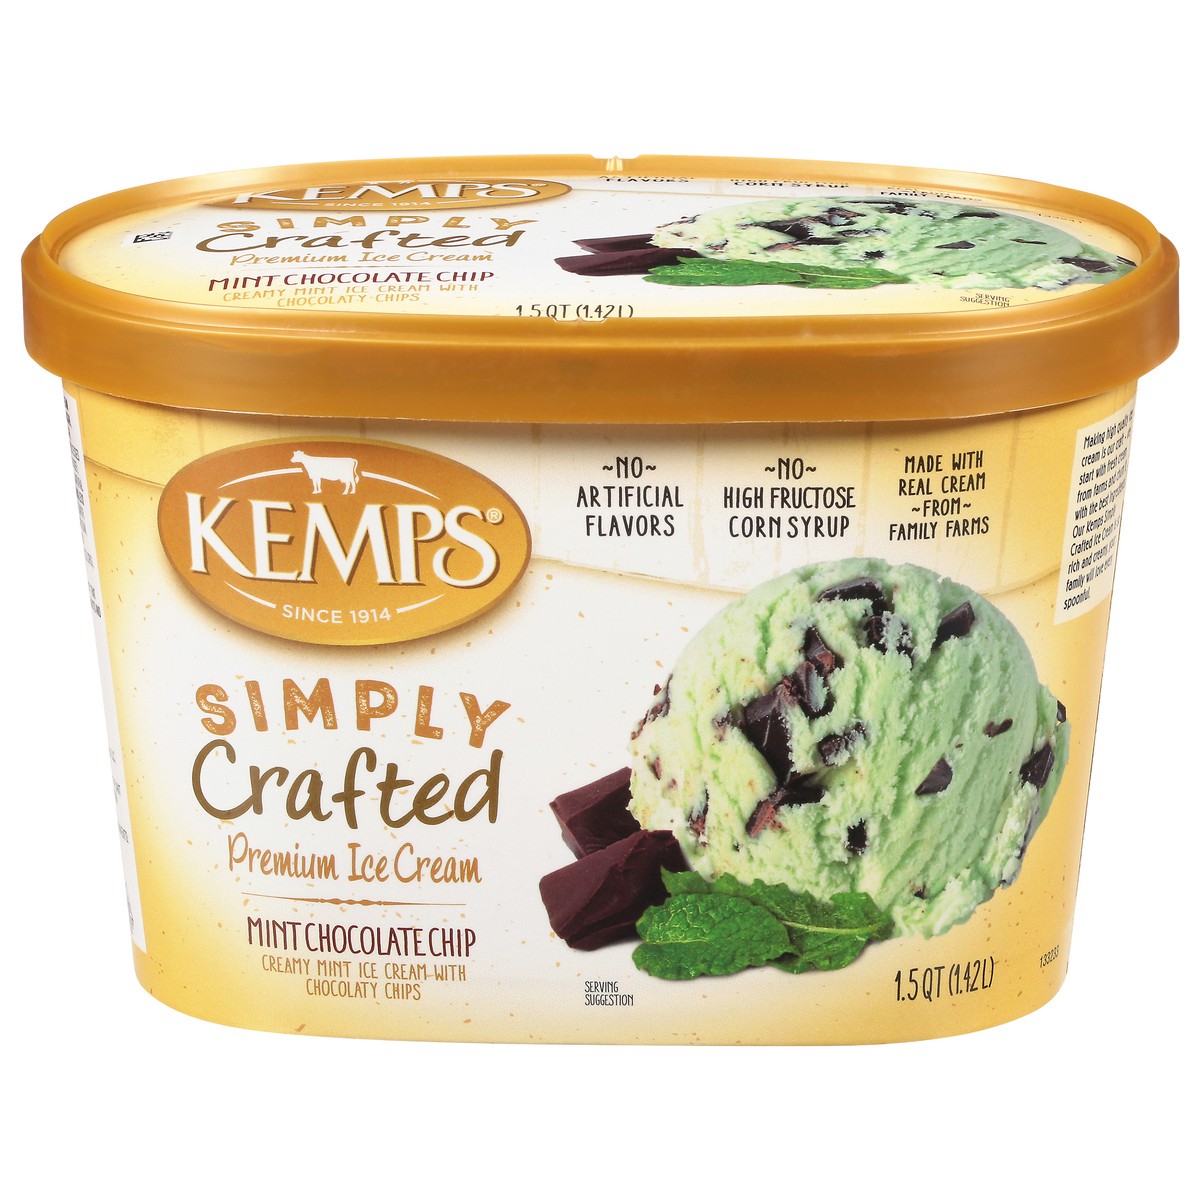 slide 1 of 9, Kemps Simply Crafted Premium Mint Chocolate Chip Ice Cream 1.5 qt, 48 oz